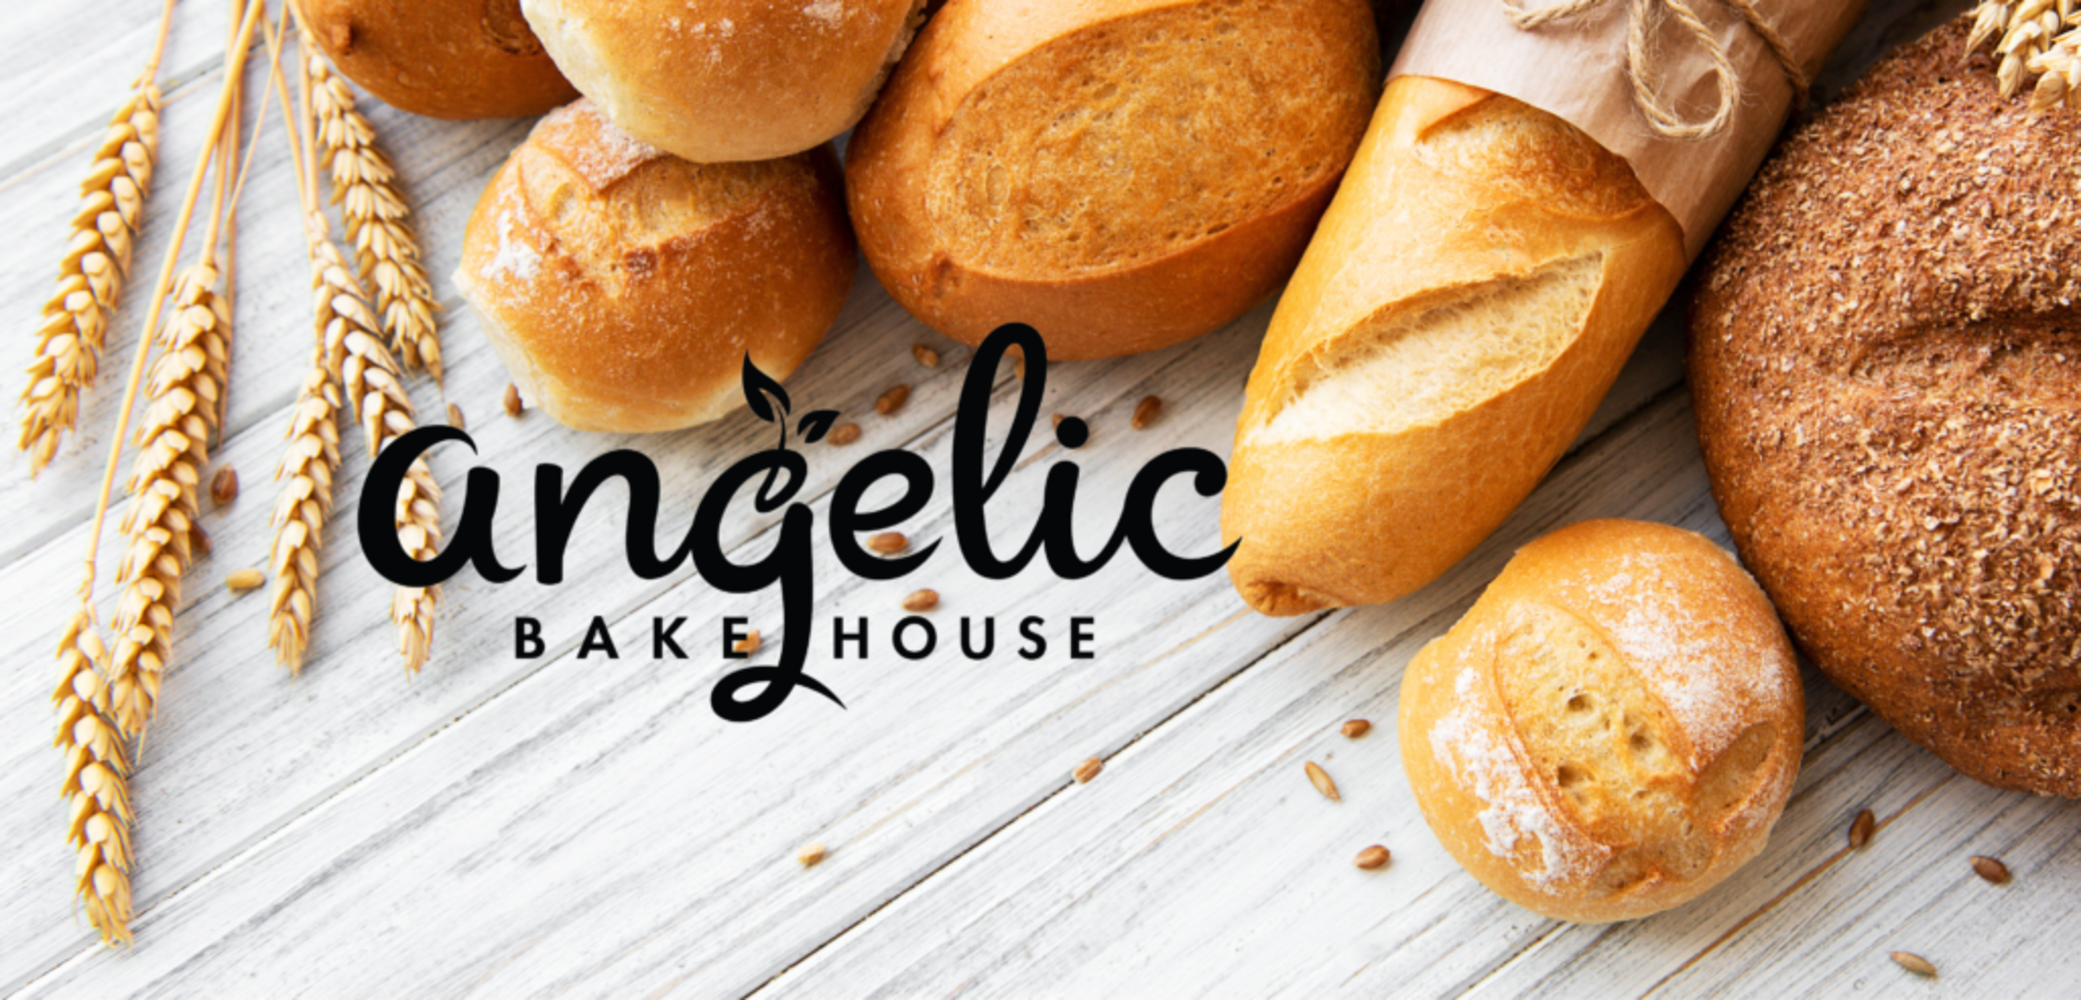 Angelic Bakehouse: NEW CLOSING 6/18 Tortilla, Flatbread, Bun Plant: 2018 W&P, Apache & Superior, Rack Ovens, Mixers, Stackers, Packaging